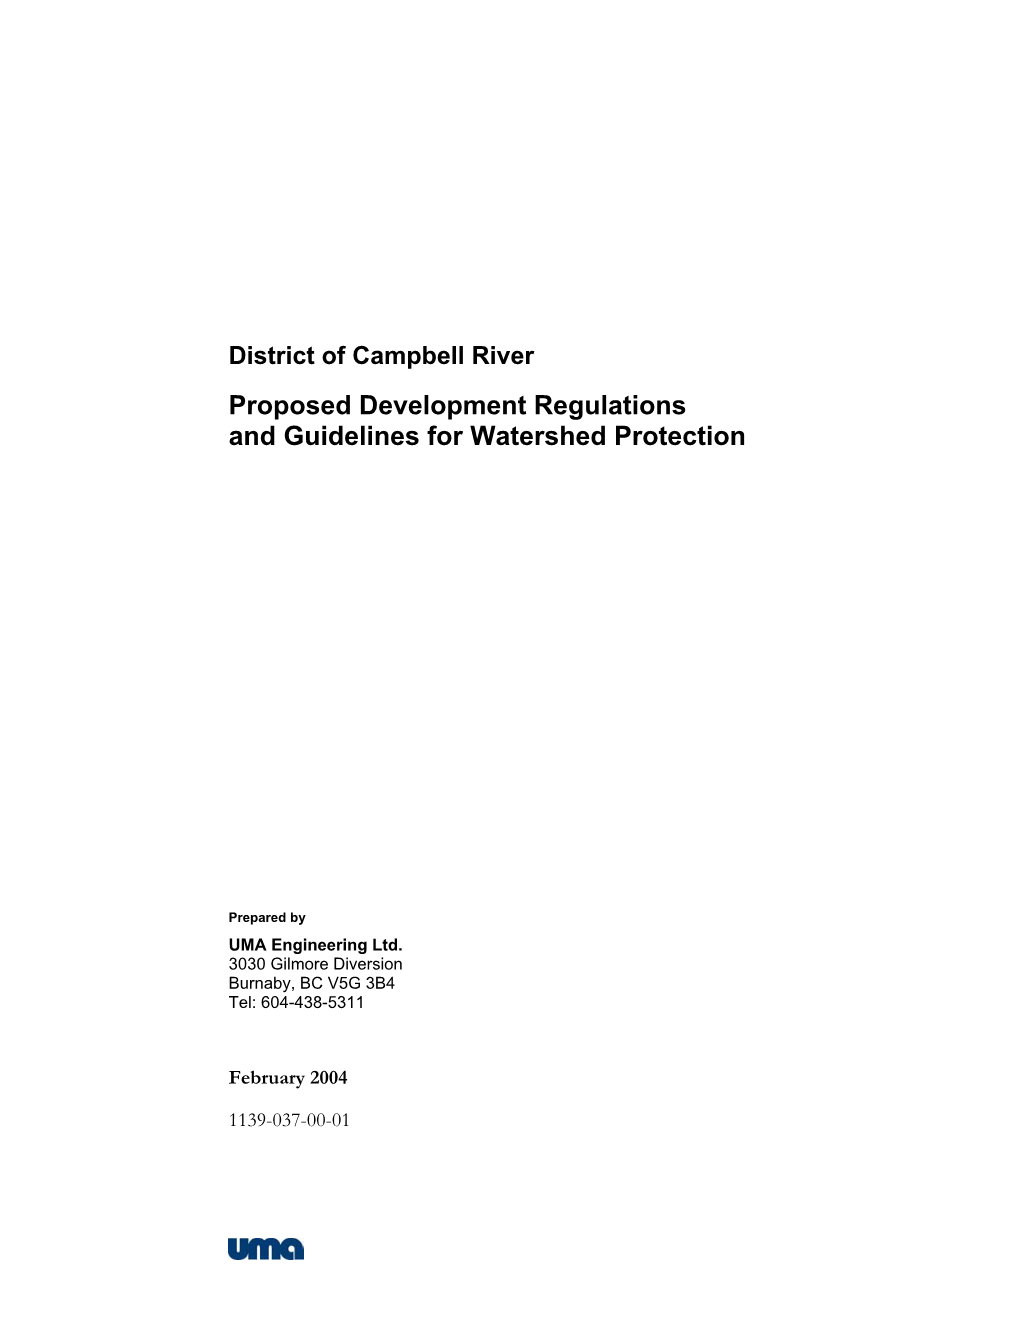 Proposed Development Regulations and Guidelines for Watershed Protection